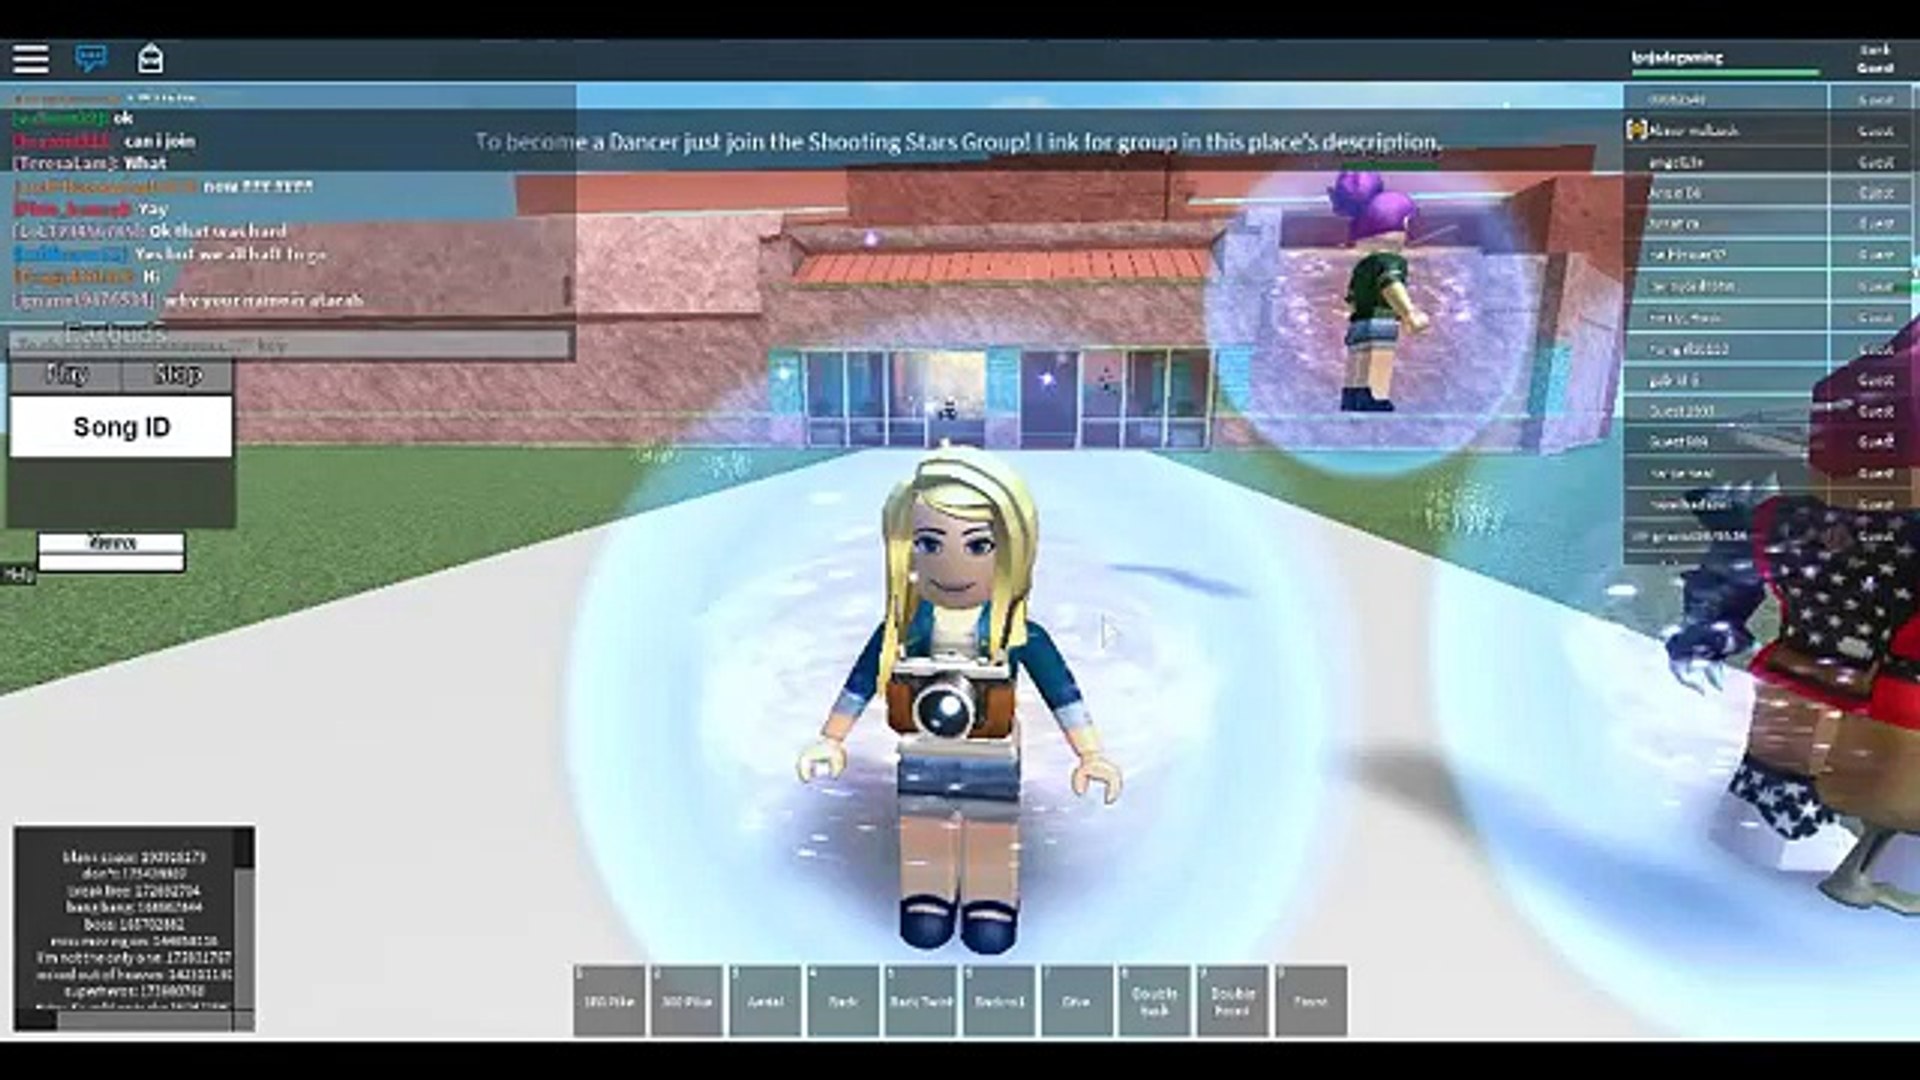 Roblox Shooting Stars Im In The Gymnastics Team With Some Front